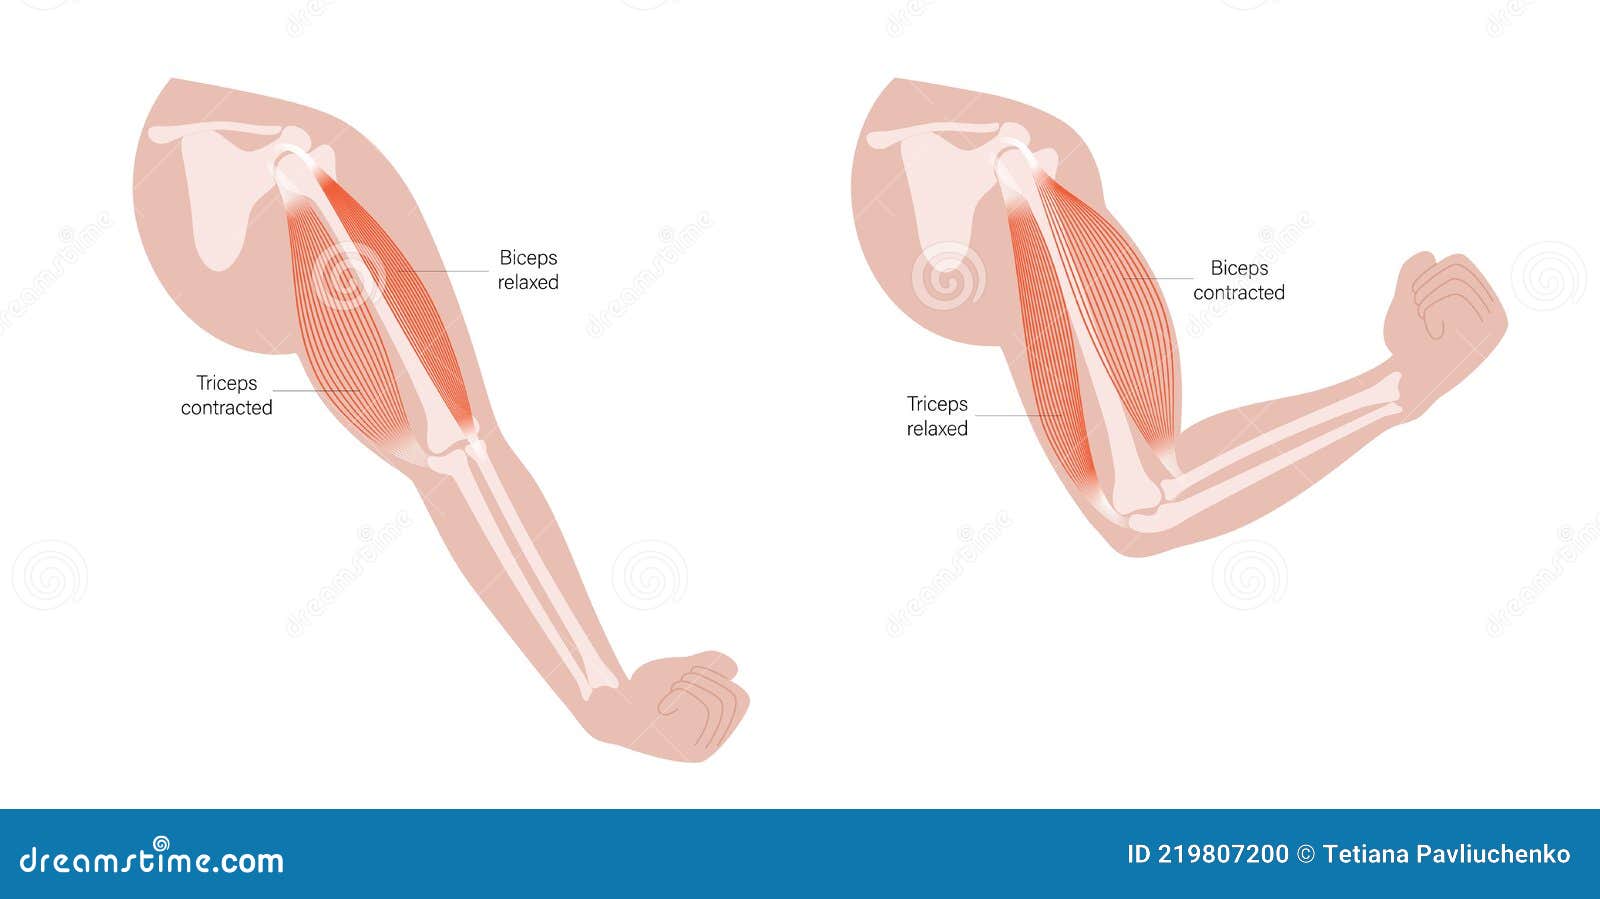 Biceps and triceps anatomy stock vector. Illustration of male